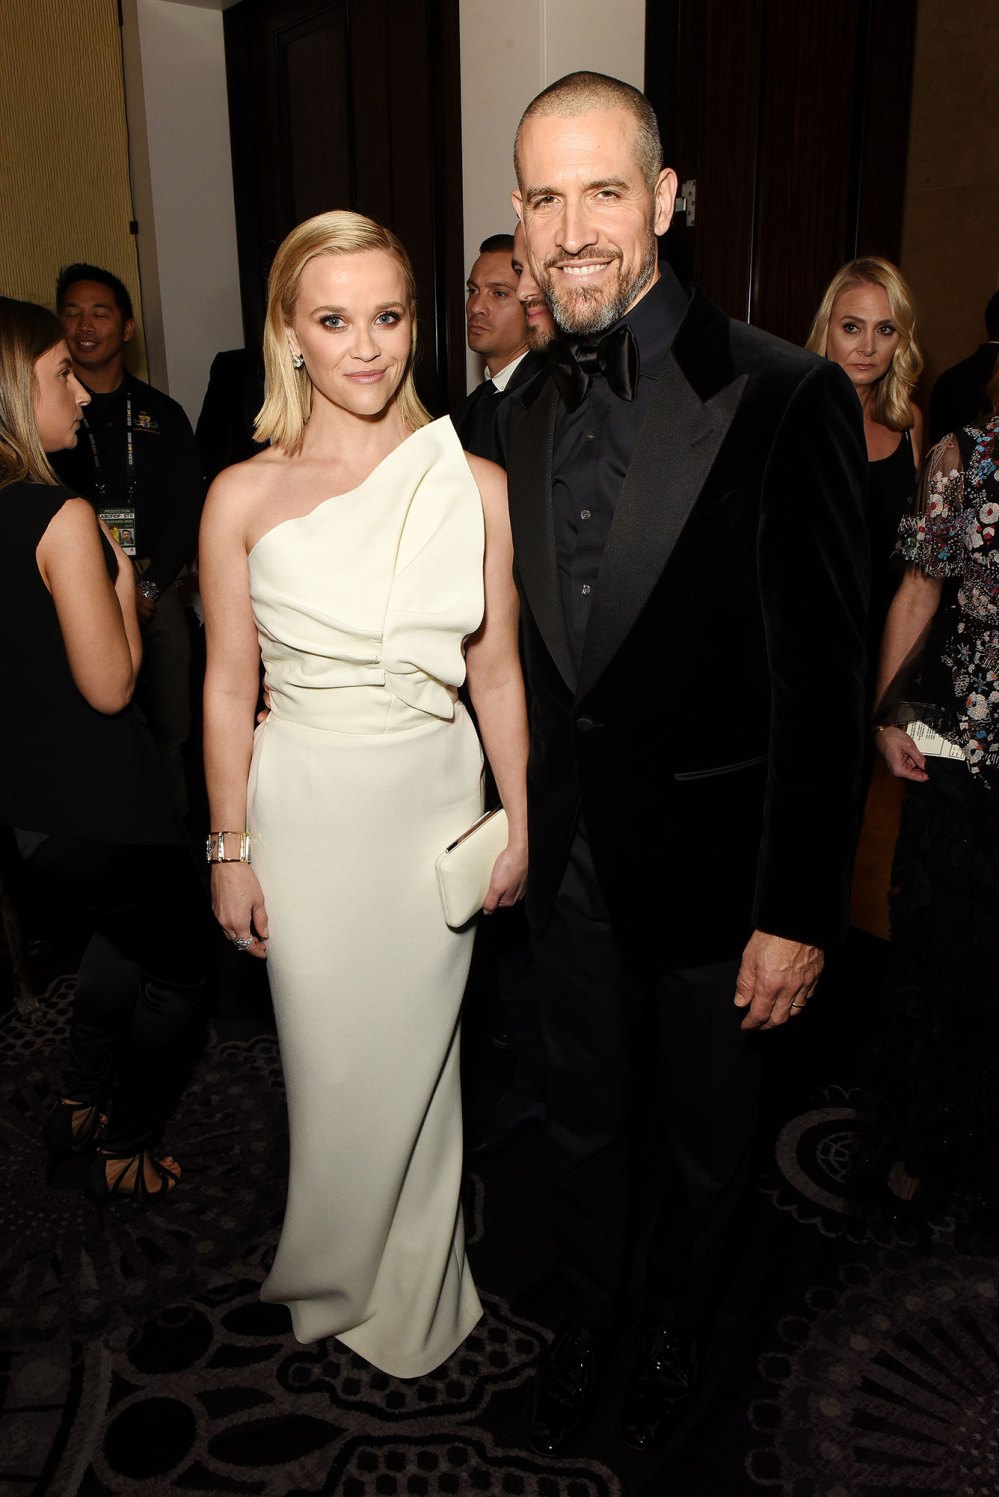 Reese Witherspoon Is Not Dating Kevin Costner Following Their Respective Divorces